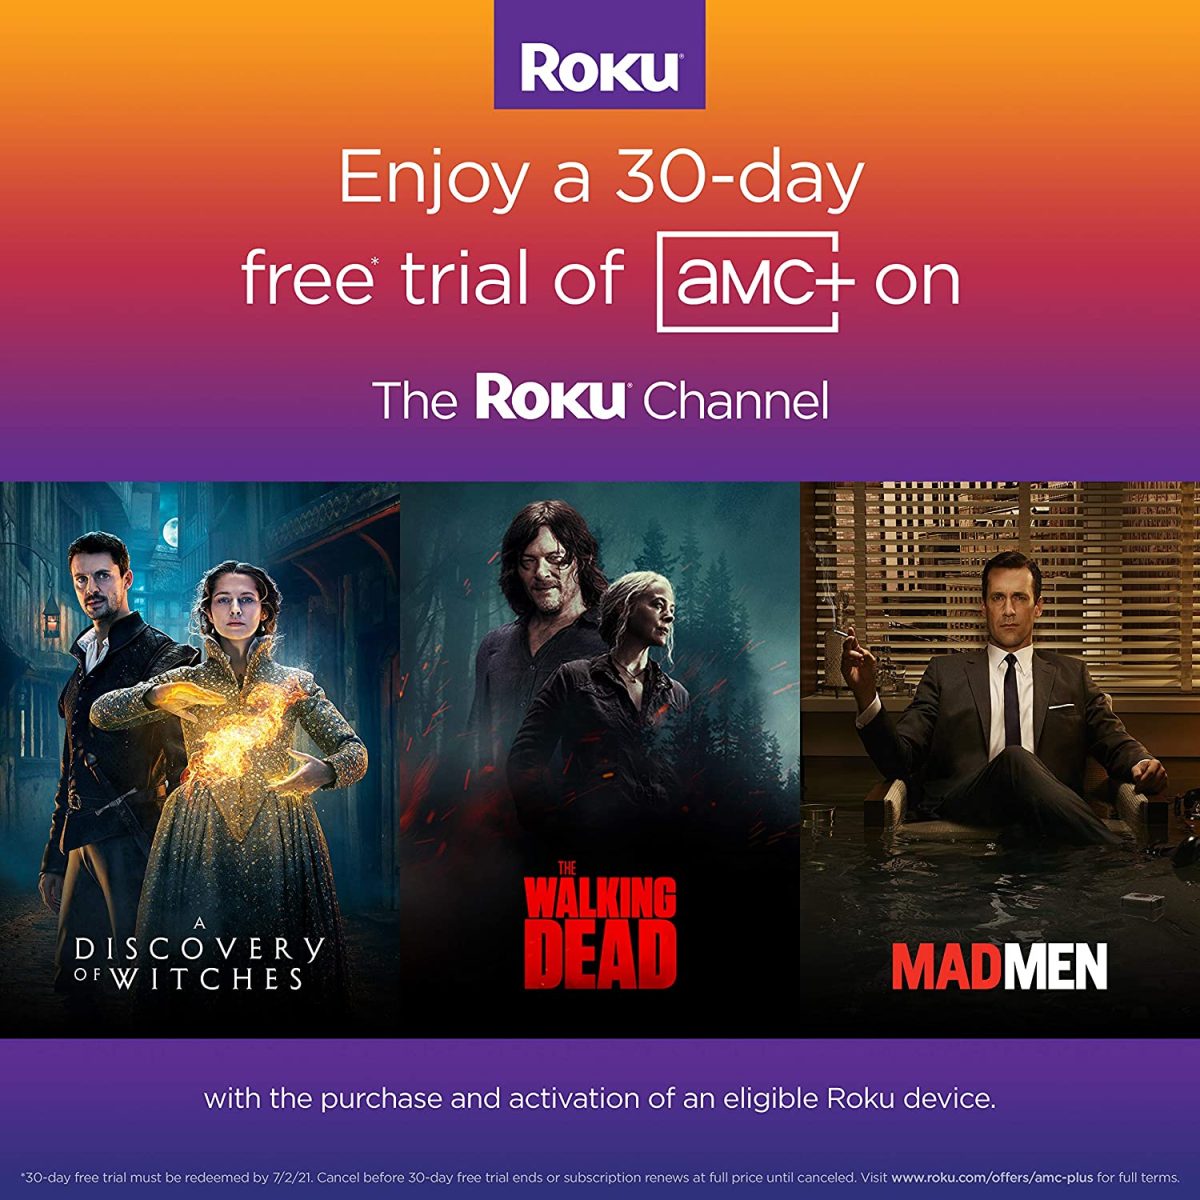 91Ksgihsyul. Ac Sl1500 Roku &Lt;H1&Gt;Roku Express | Hd Streaming Media Player With High Speed Hdmi Cable And Simple Remote&Lt;/H1&Gt; &Lt;Ul Class=&Quot;A-Unordered-List A-Vertical A-Spacing-Mini&Quot;&Gt; &Lt;Li&Gt;&Lt;Span Class=&Quot;A-List-Item&Quot;&Gt; Streaming Made Easy: Roku Express Lets You Stream Free, Live And Premium Tv Over The Internet Right To Your Tv; It’s Perfect For New Users, Secondary Tvs And Easy Gifting But Powerful Enough For Seasoned Pros &Lt;/Span&Gt;&Lt;/Li&Gt; &Lt;Li&Gt;&Lt;Span Class=&Quot;A-List-Item&Quot;&Gt; Quick And Easy Setup: Just Plug It Into Your Tv With The Included High Speed Hdmi Cable And Connect To The Internet To Get Started &Lt;/Span&Gt;&Lt;/Li&Gt; &Lt;Li&Gt;&Lt;Span Class=&Quot;A-List-Item&Quot;&Gt; Tons Of Power, Tons Of Fun: Compact And Fast, You’ll Stream Your Favorites With Ease; With Movies And Series On Apple Tv+, Prime Video, Netflix, Disney+, Hbo Max, Showtime, And Hulu With Live Tv, Enjoy The Most Talked About Entertainment &Lt;/Span&Gt;&Lt;/Li&Gt; &Lt;Li&Gt;&Lt;Span Class=&Quot;A-List-Item&Quot;&Gt; Simple Remote: Incredibly Easy To Use, This Remote Features Shortcut Buttons To Popular Streaming Channels &Lt;/Span&Gt;&Lt;/Li&Gt; &Lt;Li&Gt;&Lt;Span Class=&Quot;A-List-Item&Quot;&Gt; Endless Entertainment: Stream It All, Including Free Tv, Live News, Sports, And More; Never Miss Award-Winning Shows, The Latest Blockbuster Hits, And More; Access 500, 000+ Movies And Tv Episodes; Stream What You Love And Cut Back On Cable Tv Bills &Lt;/Span&Gt;&Lt;/Li&Gt; &Lt;Li&Gt;&Lt;Span Class=&Quot;A-List-Item&Quot;&Gt; Enjoy Free Tv Channels: Stream Live Tv, 24/7 News, Sports, Movies, Shows, And More On The Roku Channel, Plus A Huge Collection Of Free Entertainment From Top Channels On Featured Free &Lt;/Span&Gt;&Lt;/Li&Gt; &Lt;/Ul&Gt; &Lt;Div Class=&Quot;A-Row A-Expander-Container A-Expander-Inline-Container&Quot;&Gt; &Lt;Div Class=&Quot;A-Expander-Content A-Expander-Extend-Content A-Expander-Content-Expanded&Quot;&Gt; &Lt;Ul Class=&Quot;A-Unordered-List A-Vertical A-Spacing-None&Quot;&Gt; &Lt;Li&Gt;&Lt;Span Class=&Quot;A-List-Item&Quot;&Gt;The Free Roku Mobile App: Turn Your Ios Or Android Device Into The Ultimate Streaming Companion; Control Your Roku Express Media Player Or Roku Tv, Use Voice Search, Enjoy Private Listening, And More On Ios And Android&Lt;/Span&Gt;&Lt;/Li&Gt; &Lt;Li&Gt;&Lt;Span Class=&Quot;A-List-Item&Quot;&Gt;Automatic Software Updates: Get The Most Up To Date Software Including All The Latest Features And Available Channels Without Even Thinking About It&Lt;/Span&Gt;&Lt;/Li&Gt; &Lt;Li&Gt;&Lt;Span Class=&Quot;A-List-Item&Quot;&Gt;Works With Popular Voice Assistants: Enjoy Easy Voice Control With Siri, Alexa, Or Hey Google&Lt;/Span&Gt;&Lt;/Li&Gt; &Lt;/Ul&Gt; &Lt;/Div&Gt; &Lt;/Div&Gt; Roku Express Roku Express | Hd Streaming Media Player With High Speed Hdmi Cable And Simple Remote